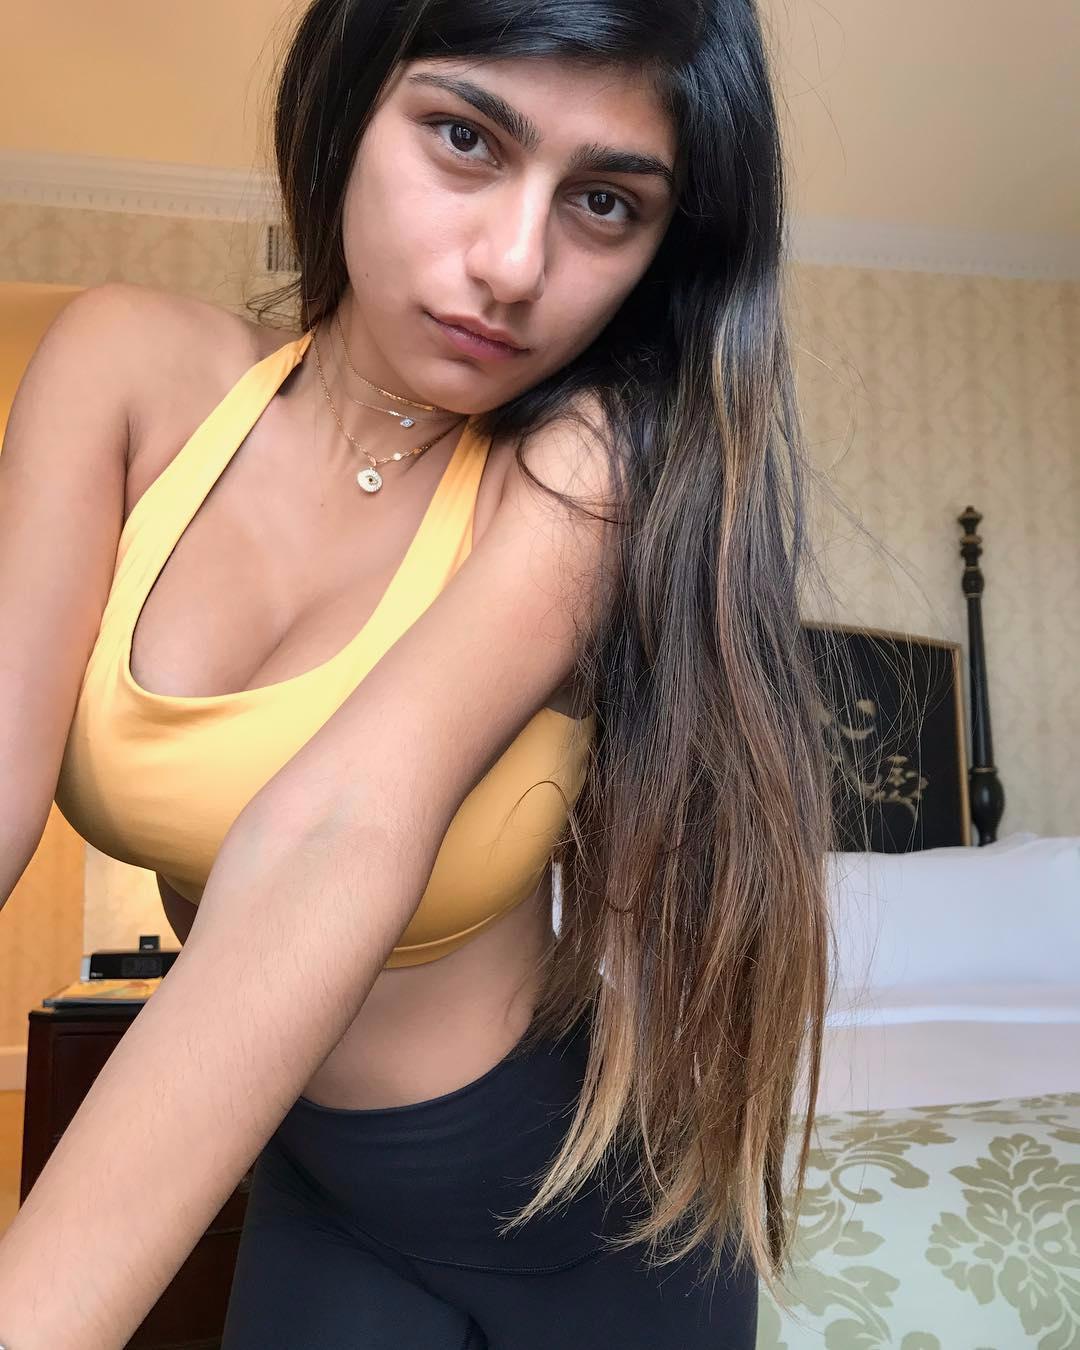 mia khalifa only worked in the adult film industry for three months